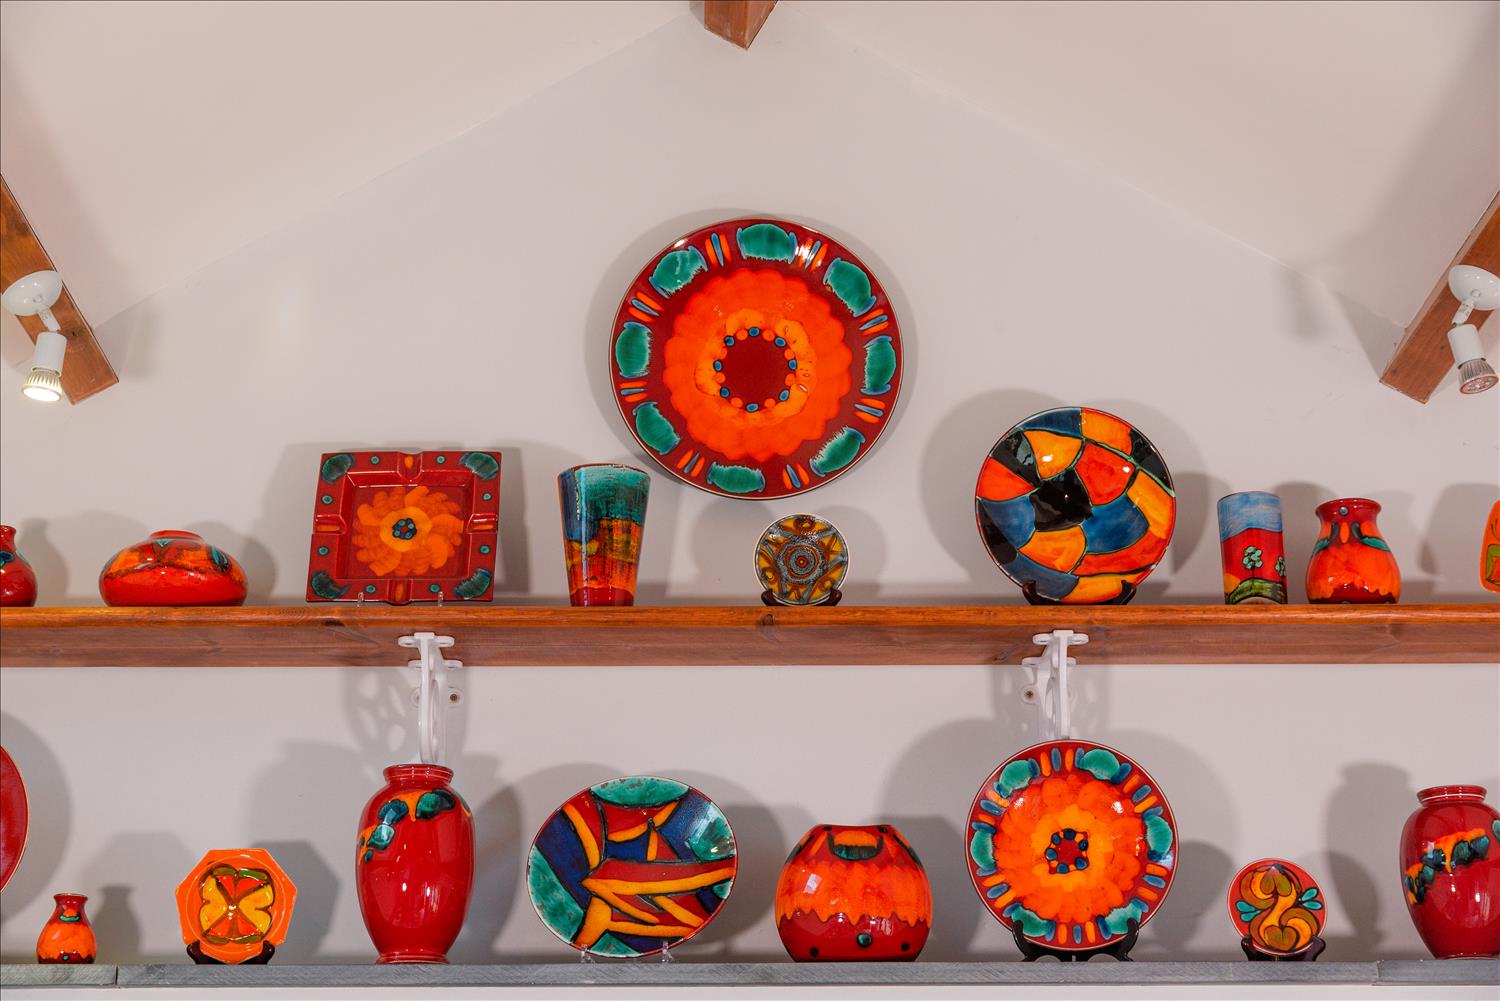 Sloe Cottage's collection of bright-coloured pottery plates, vases and dishes